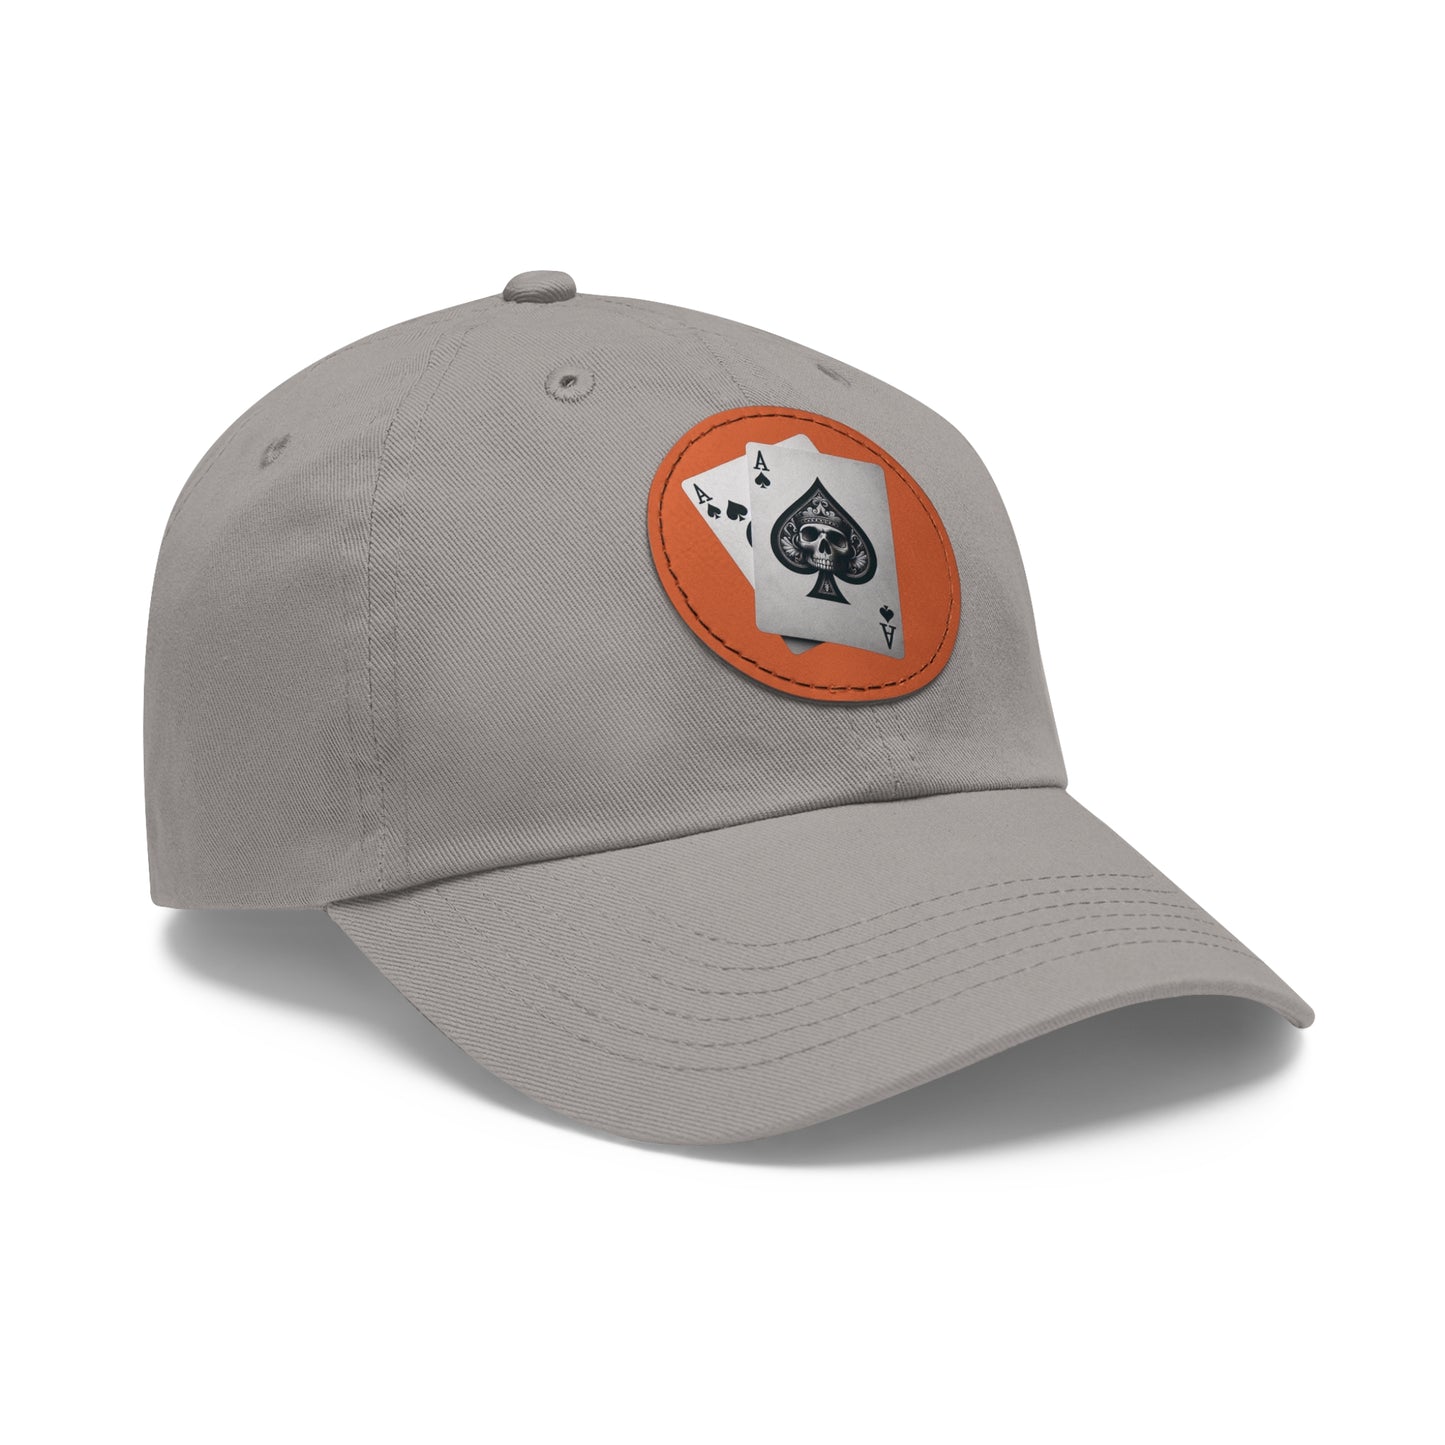 Copy of Dad Hat with Leather Patch (Round)